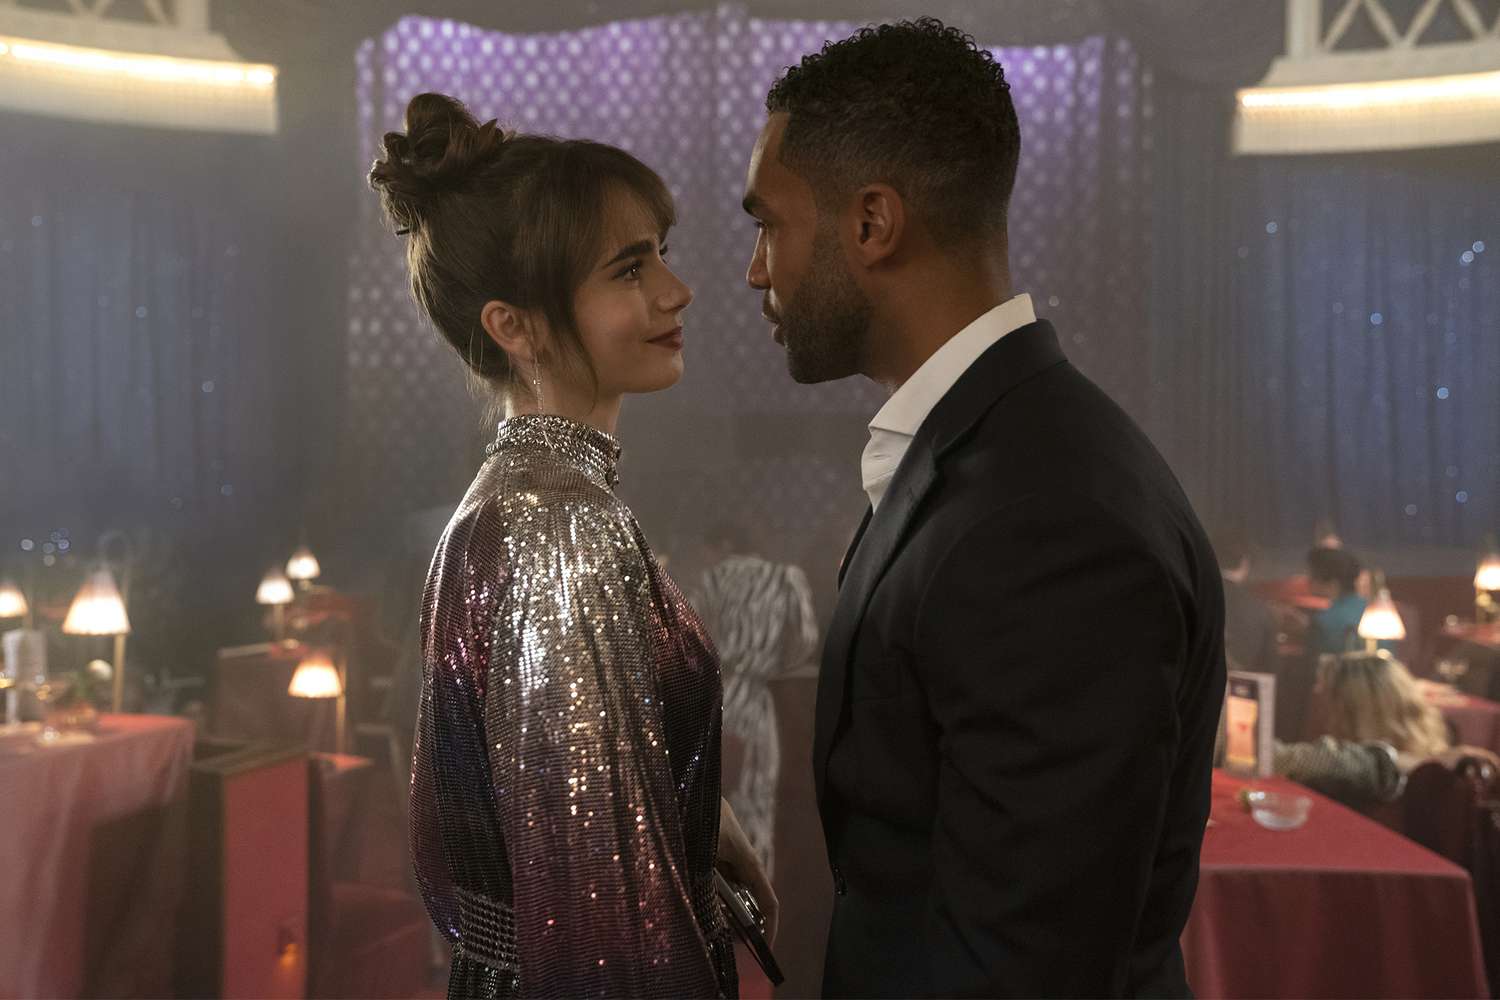 Emily in Paris. (L to R) Lily Collins as Emily, Lucien Laviscount as Alfie in episode 303 of Emily in Paris. Cr. Stéphanie Branchu/Netflix © 2022